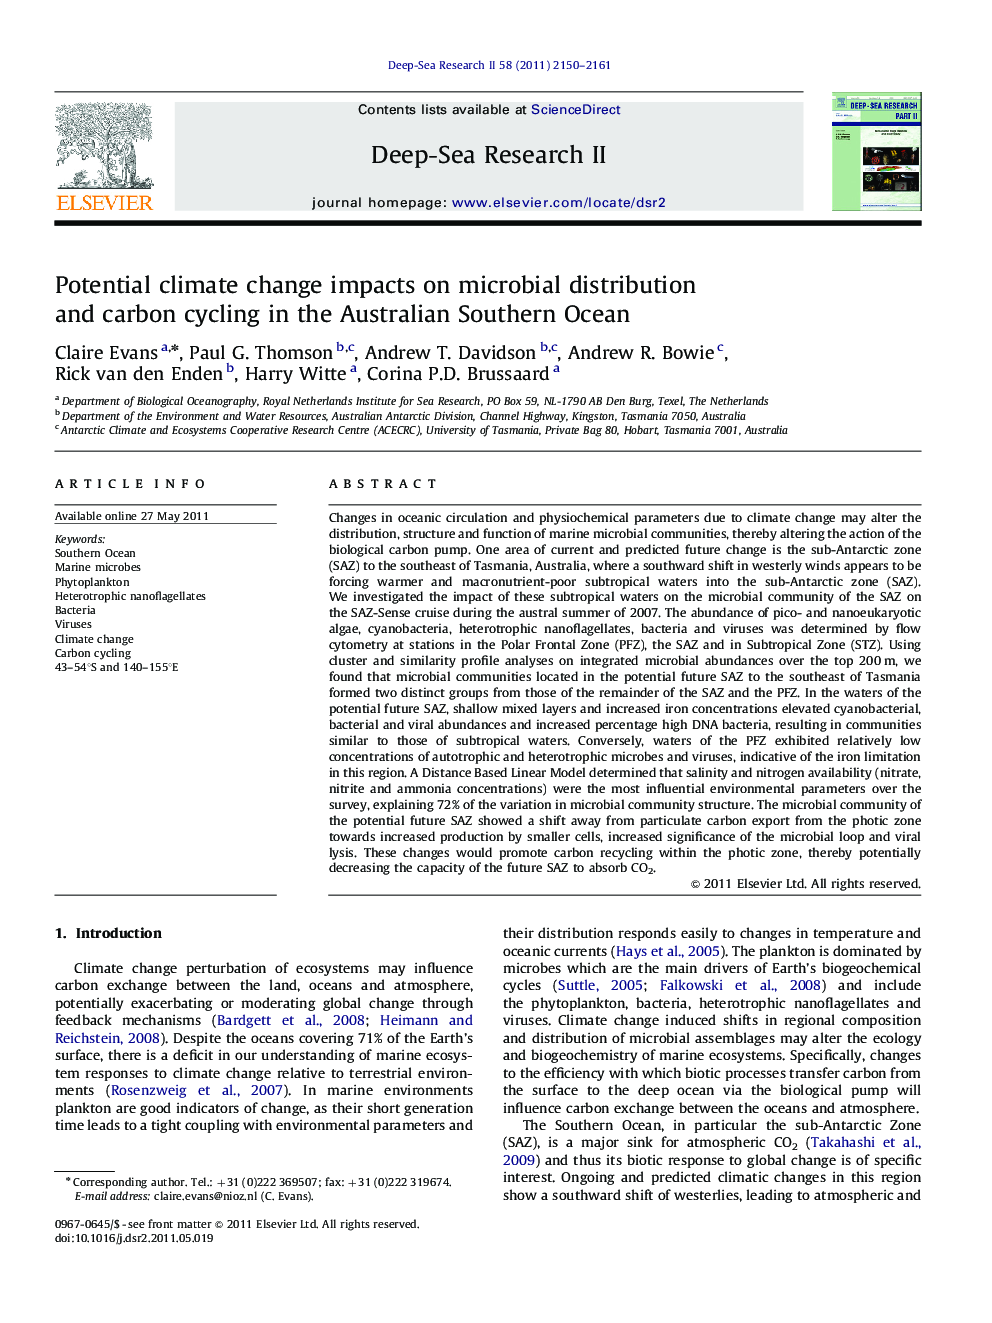 Potential climate change impacts on microbial distribution and carbon cycling in the Australian Southern Ocean